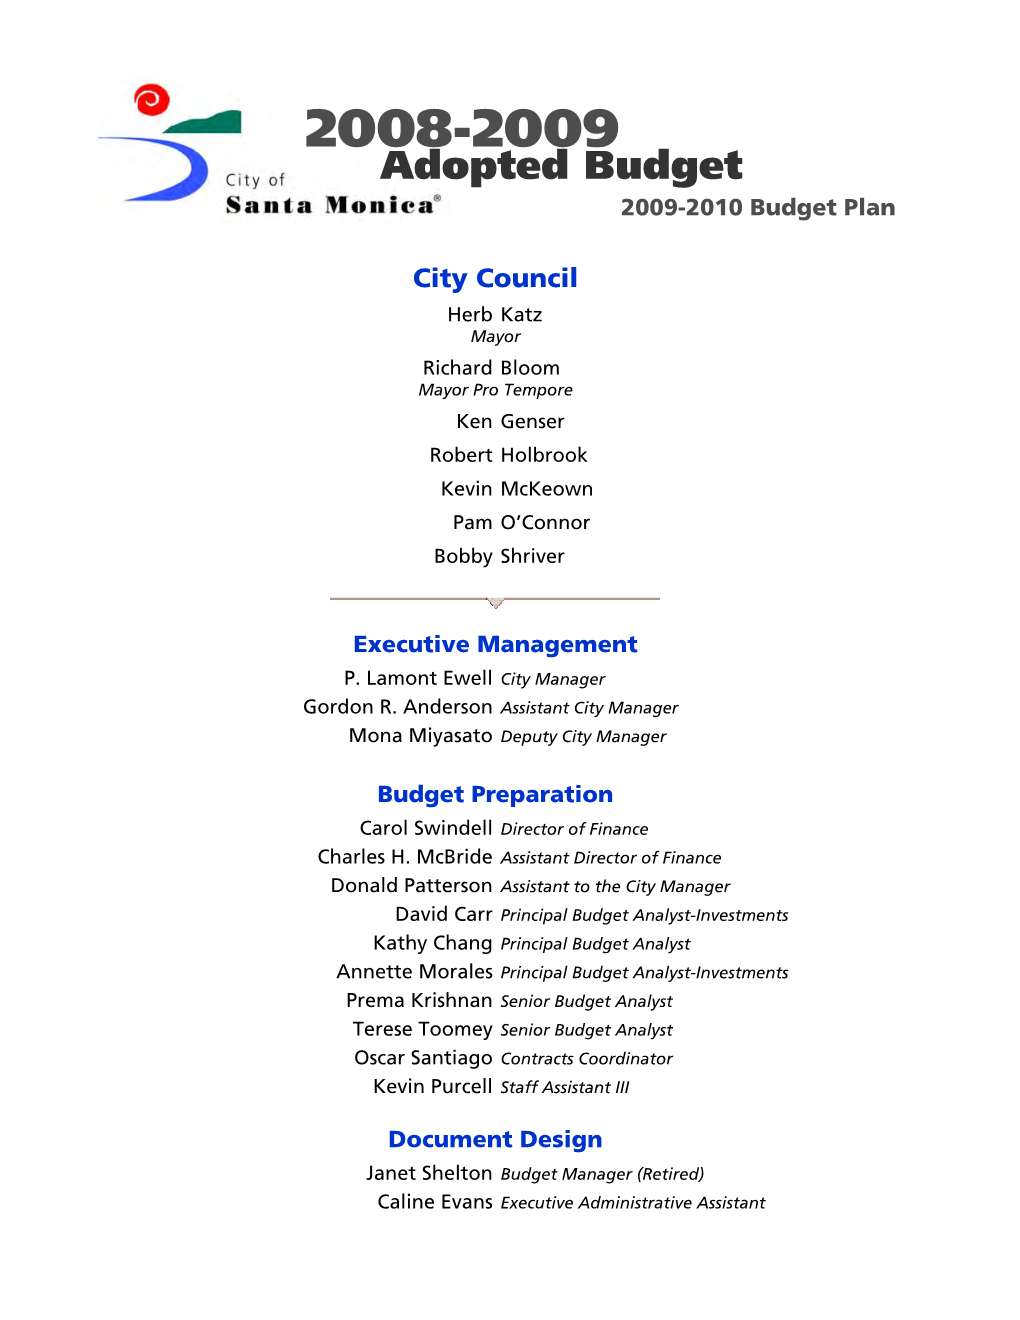 Operating and Capital Budgets, the Capital Plan, and the Five Year Forecast